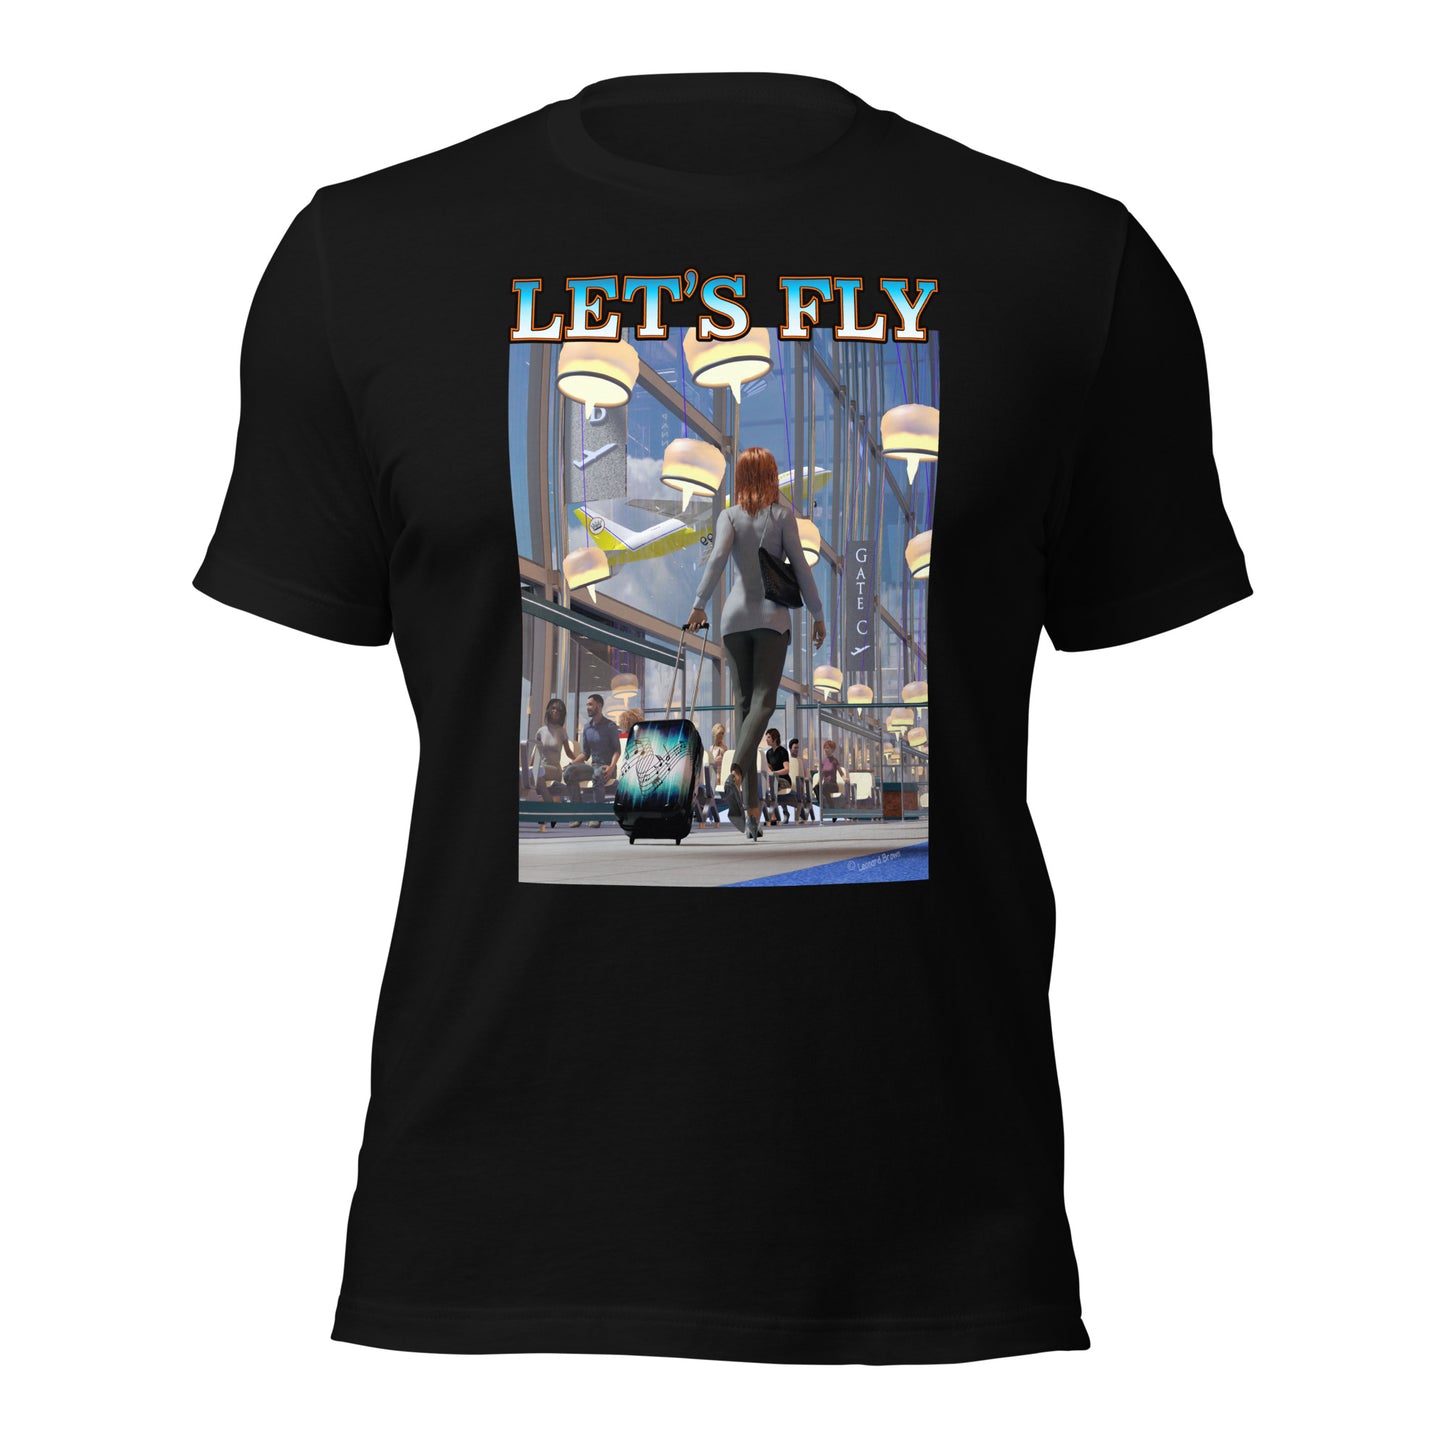 Let’s Fly Yellow Plane t-shirt